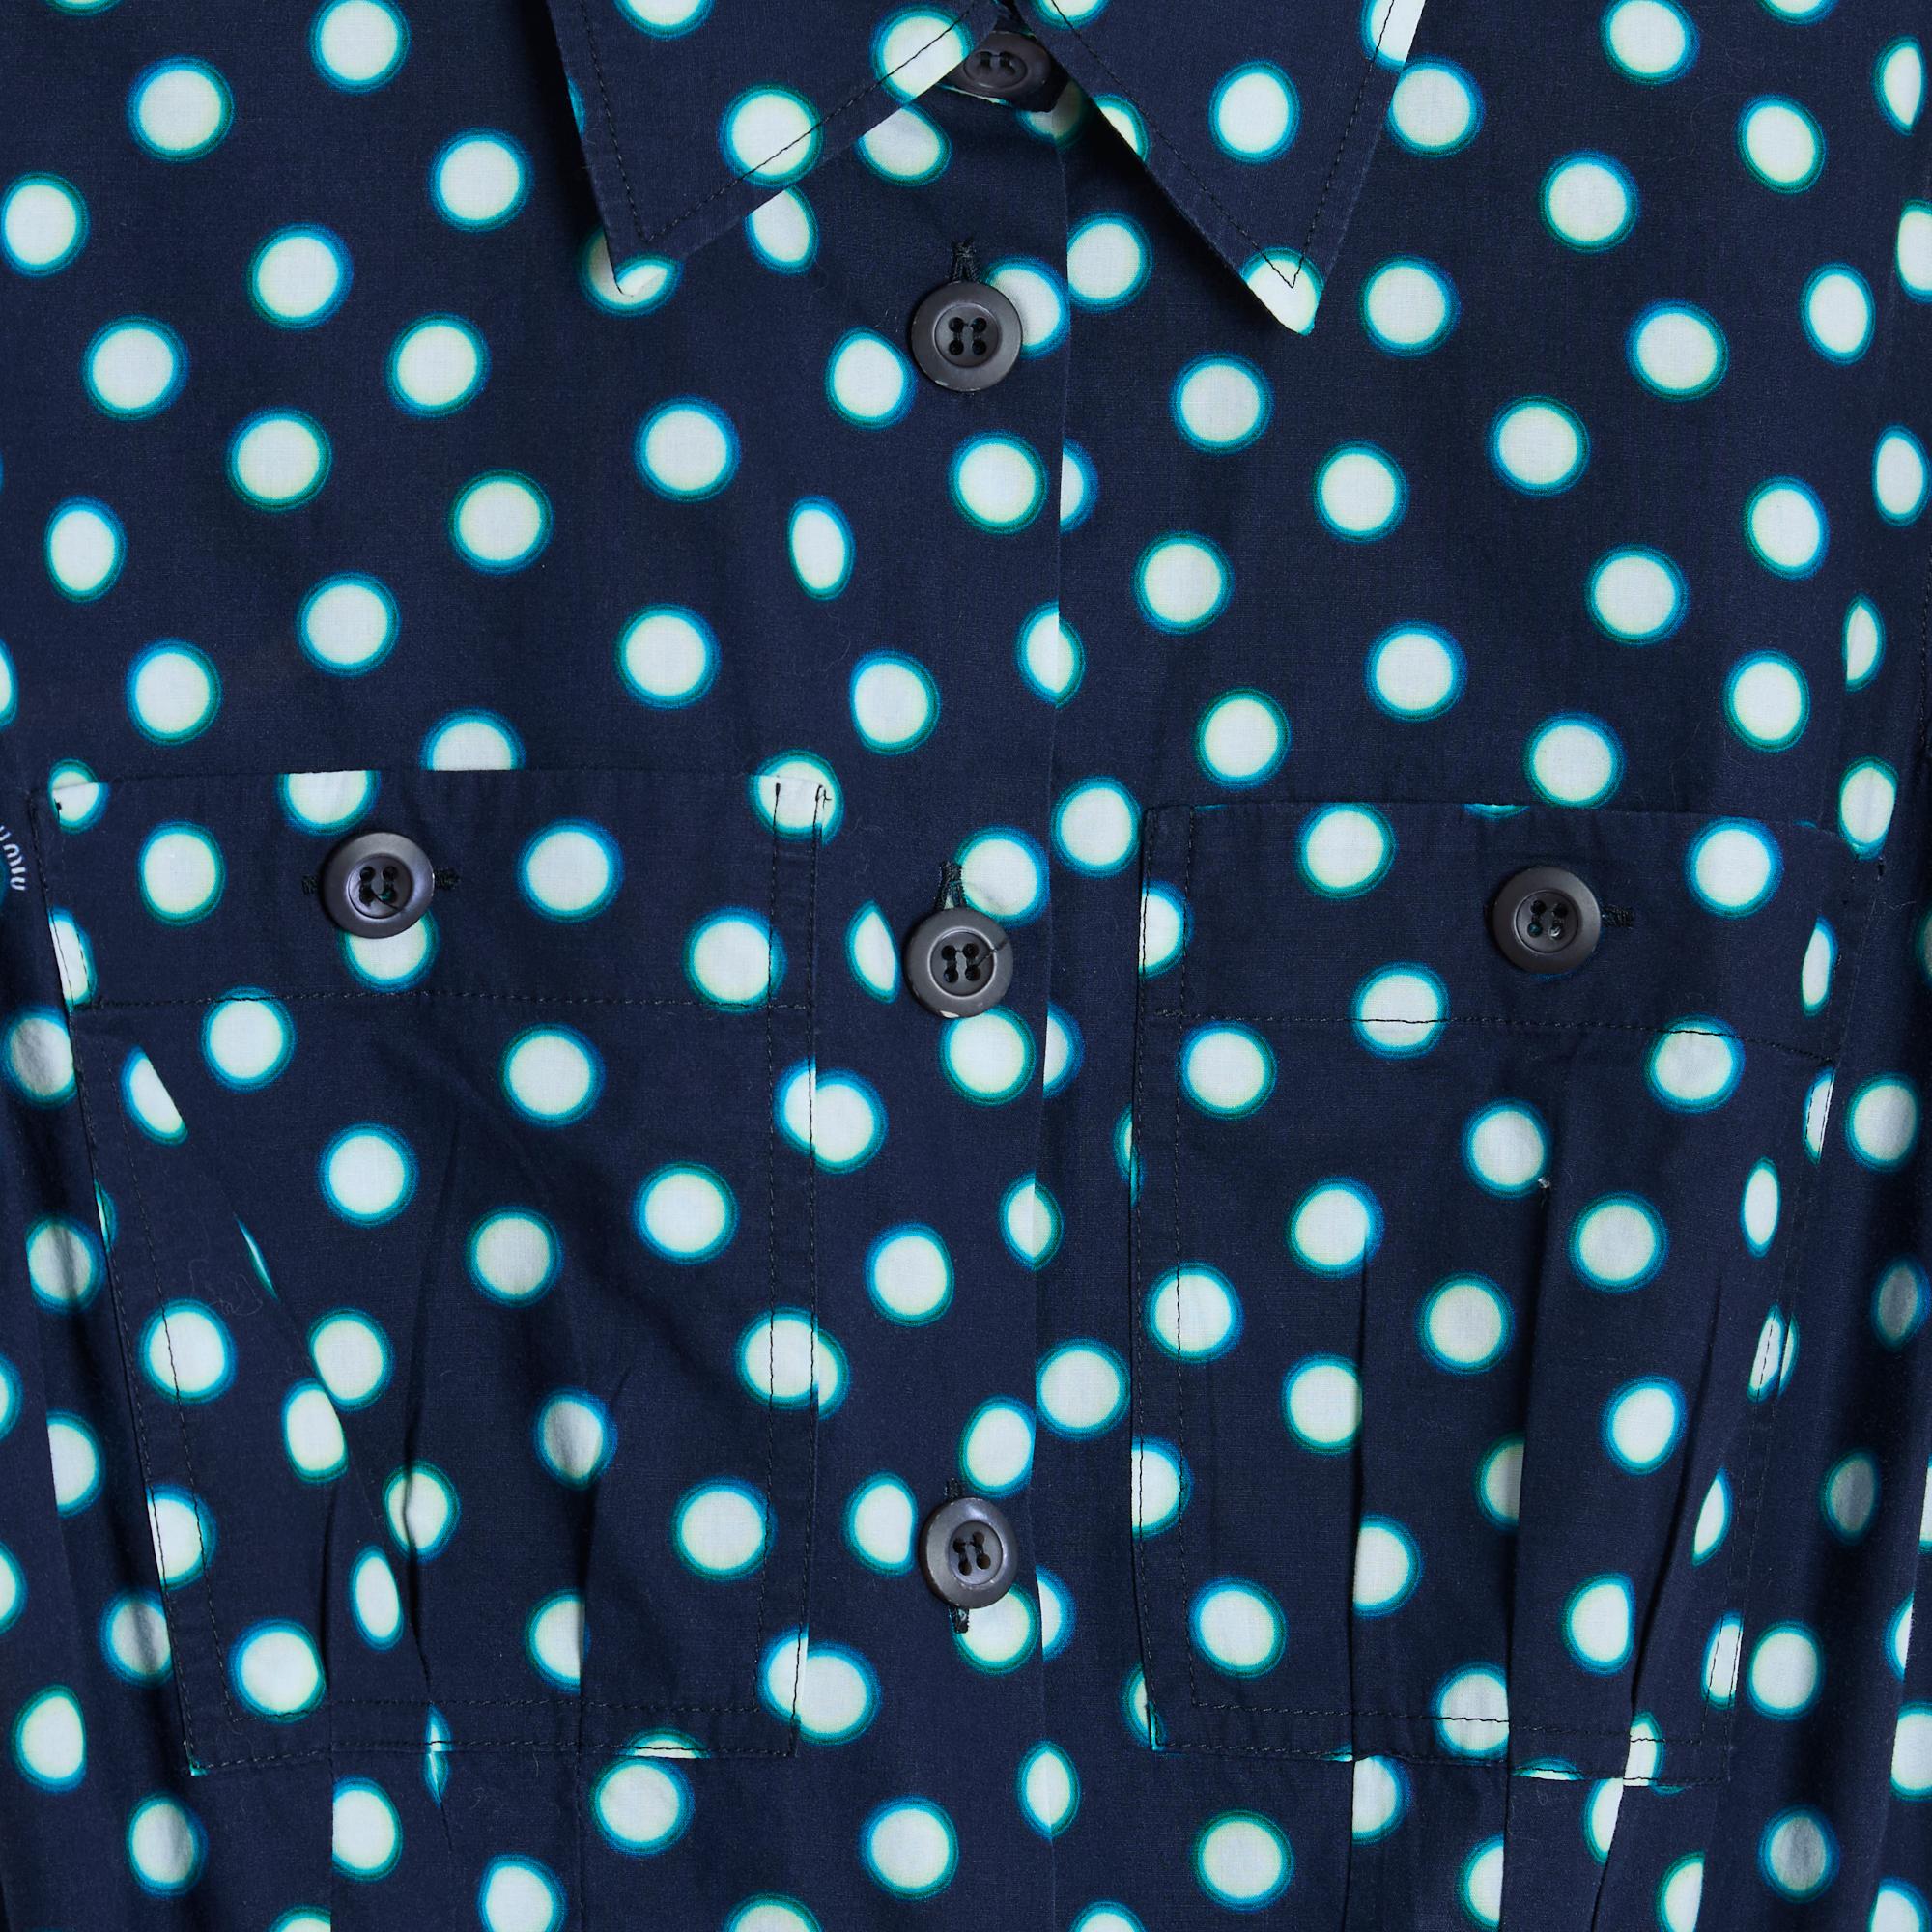 Miu Miu dress in navy blue cotton with white polka dot pattern edged in green, shirt collar closed with 9 buttons along the entire length of the dress, 2 patch and buttoned pockets on the chest, short sleeves also buttoned, skater-shaped skirt,